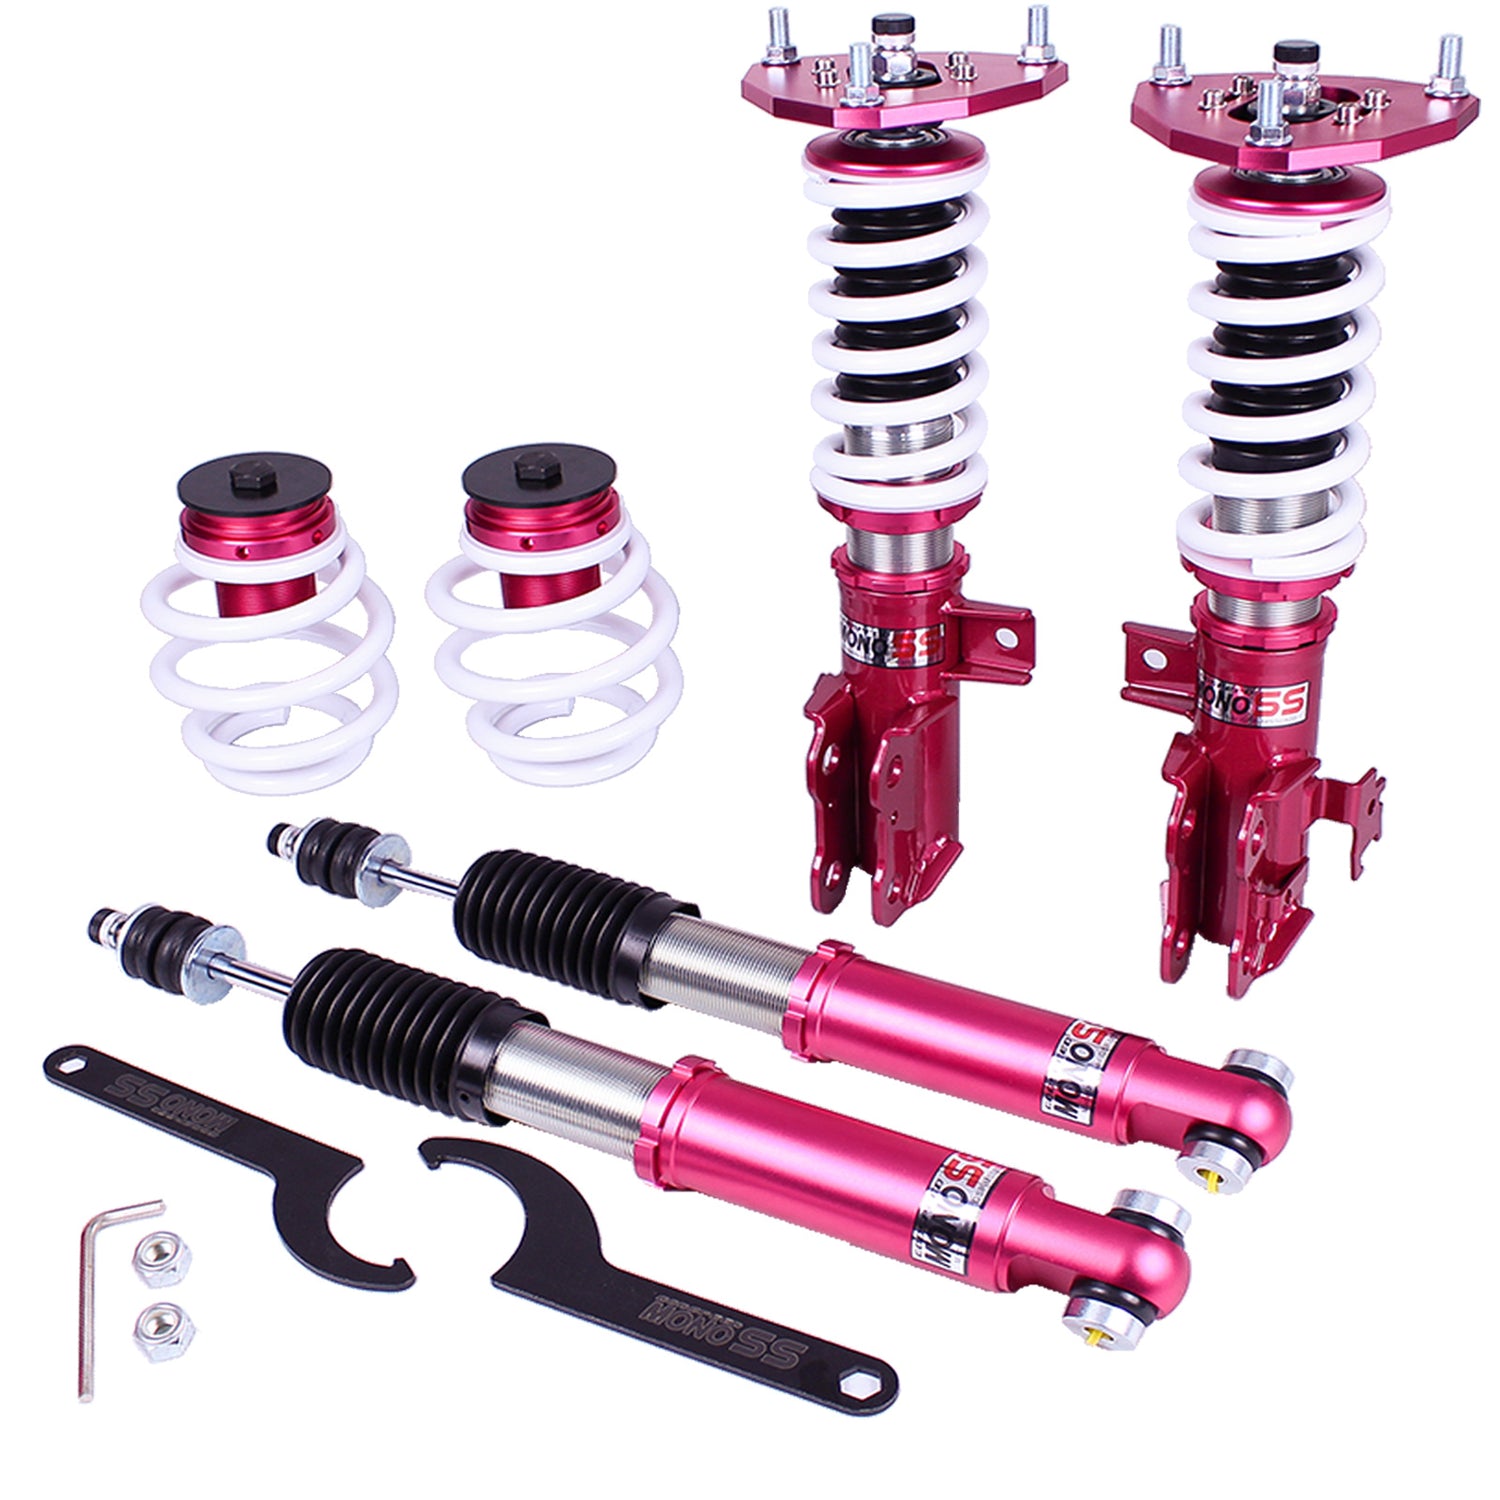 Godspeed MSS0920-C MonoSS Coilover Lowering Kit, Fully Adjustable, Ride Height, Spring Tension And 16 Click Damping, Toyota Corolla iM (E180) 2017-18